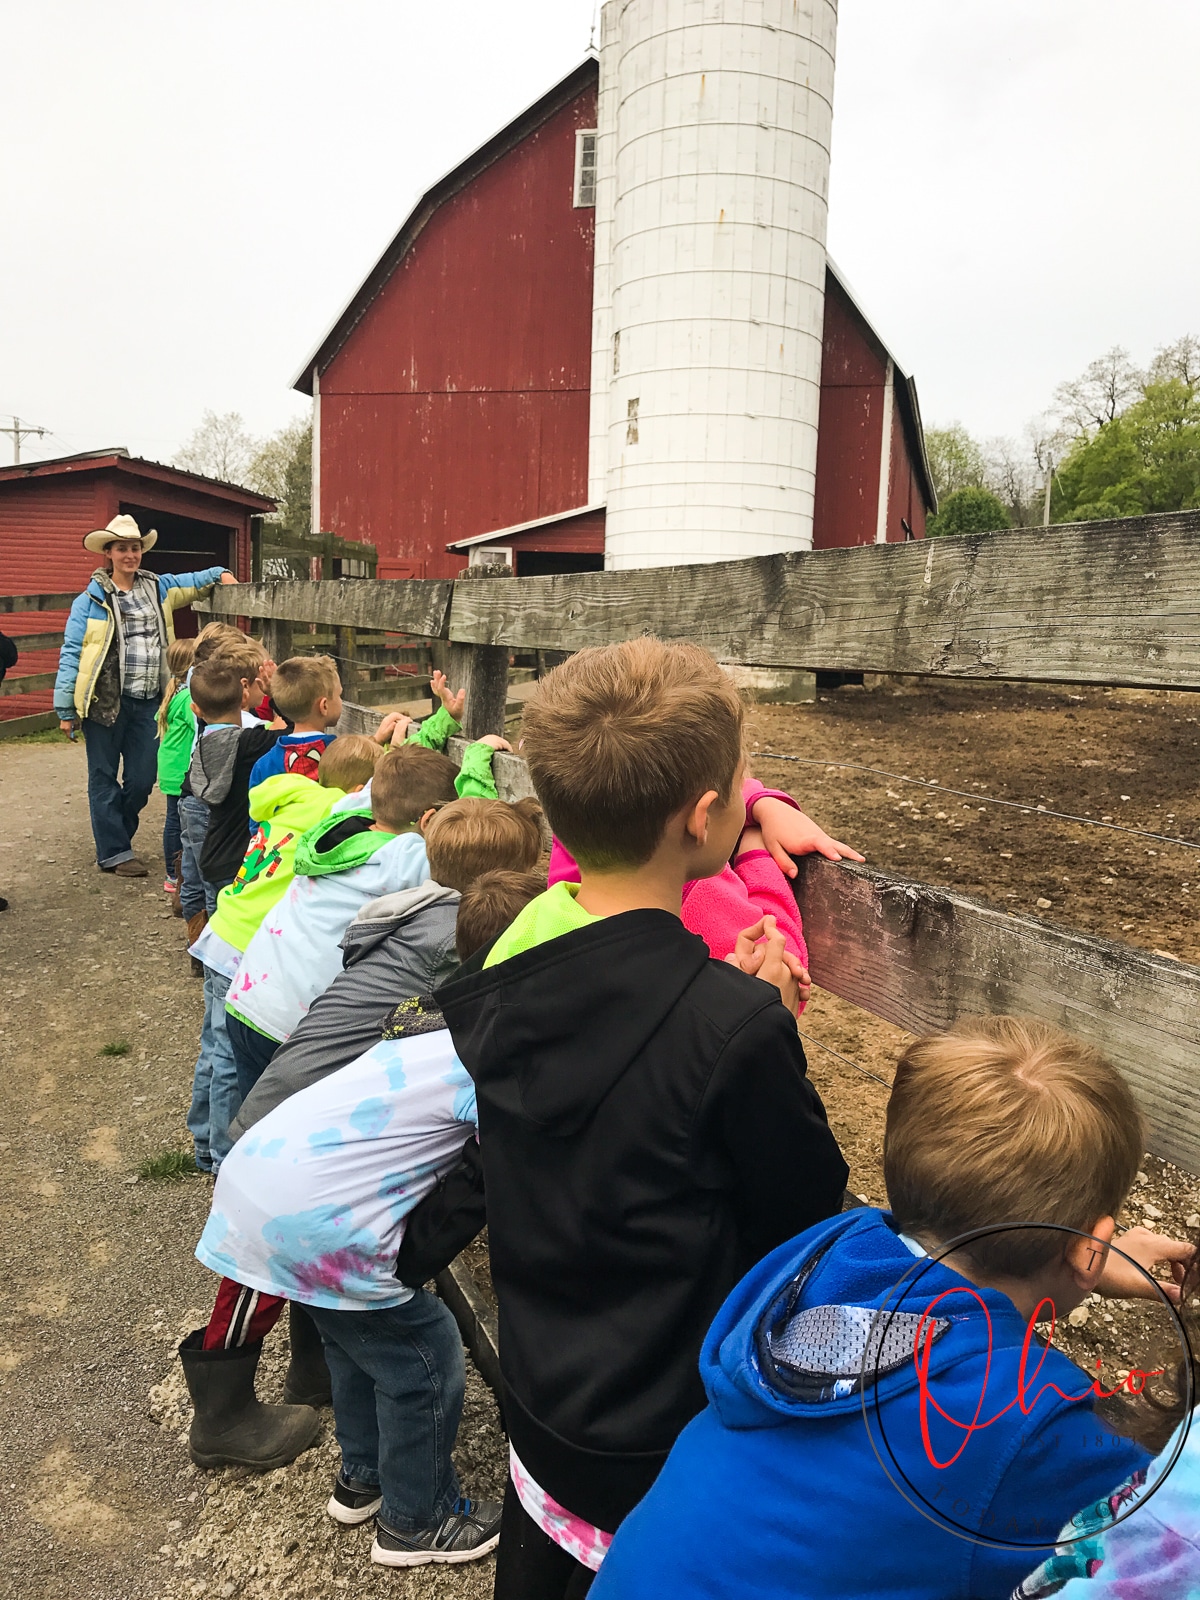 young kids lined up to a wooden fence in front of an old red barn with a white silo